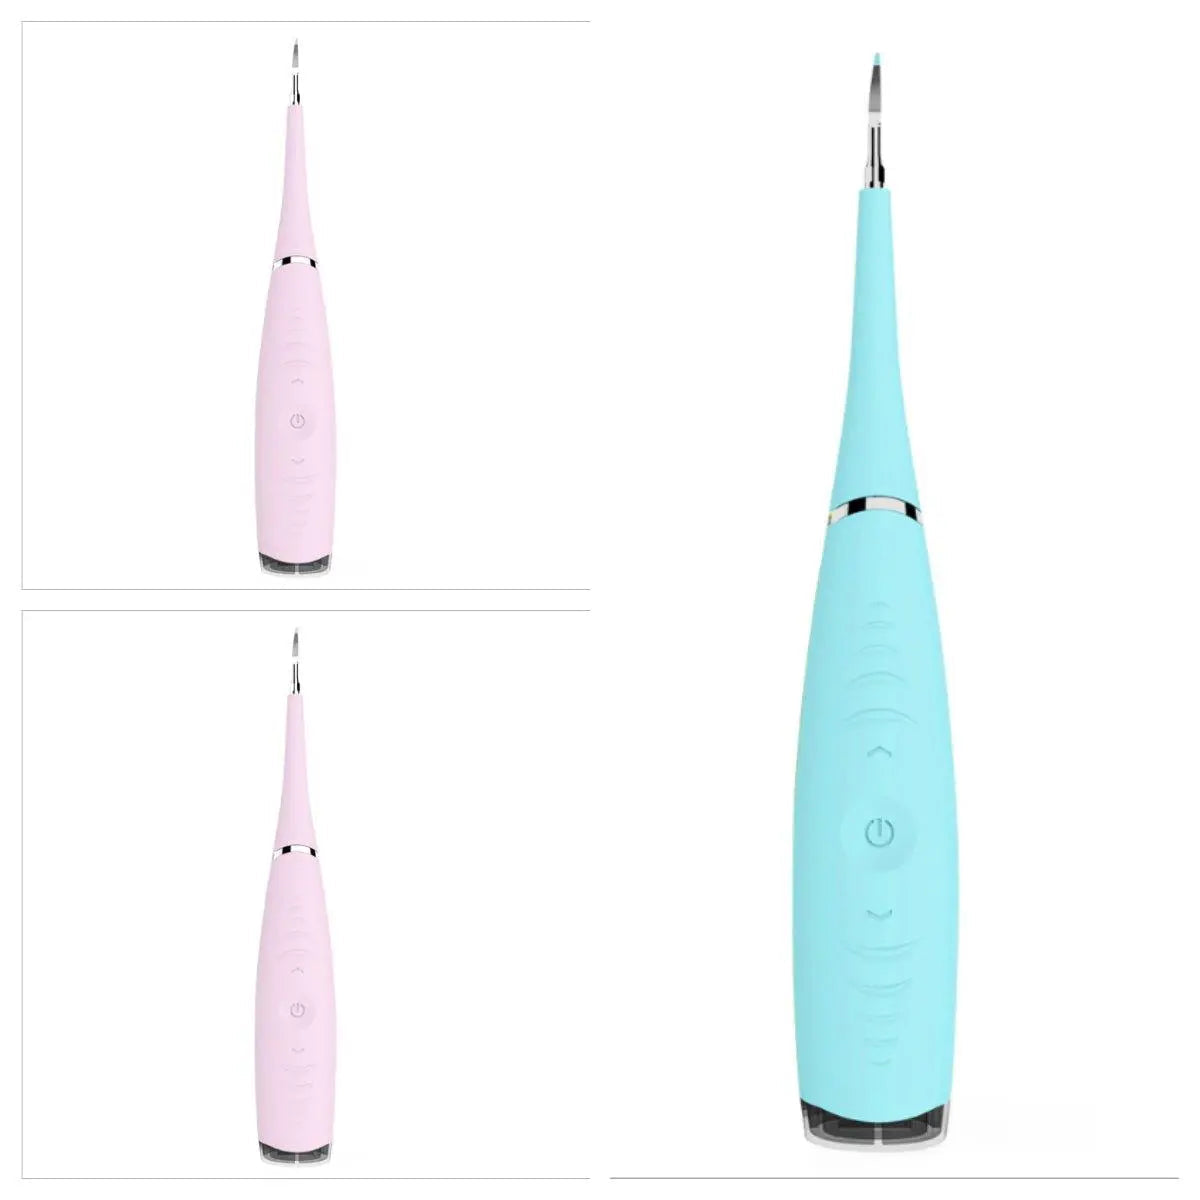  Electric Tooth Cleaner cashymart